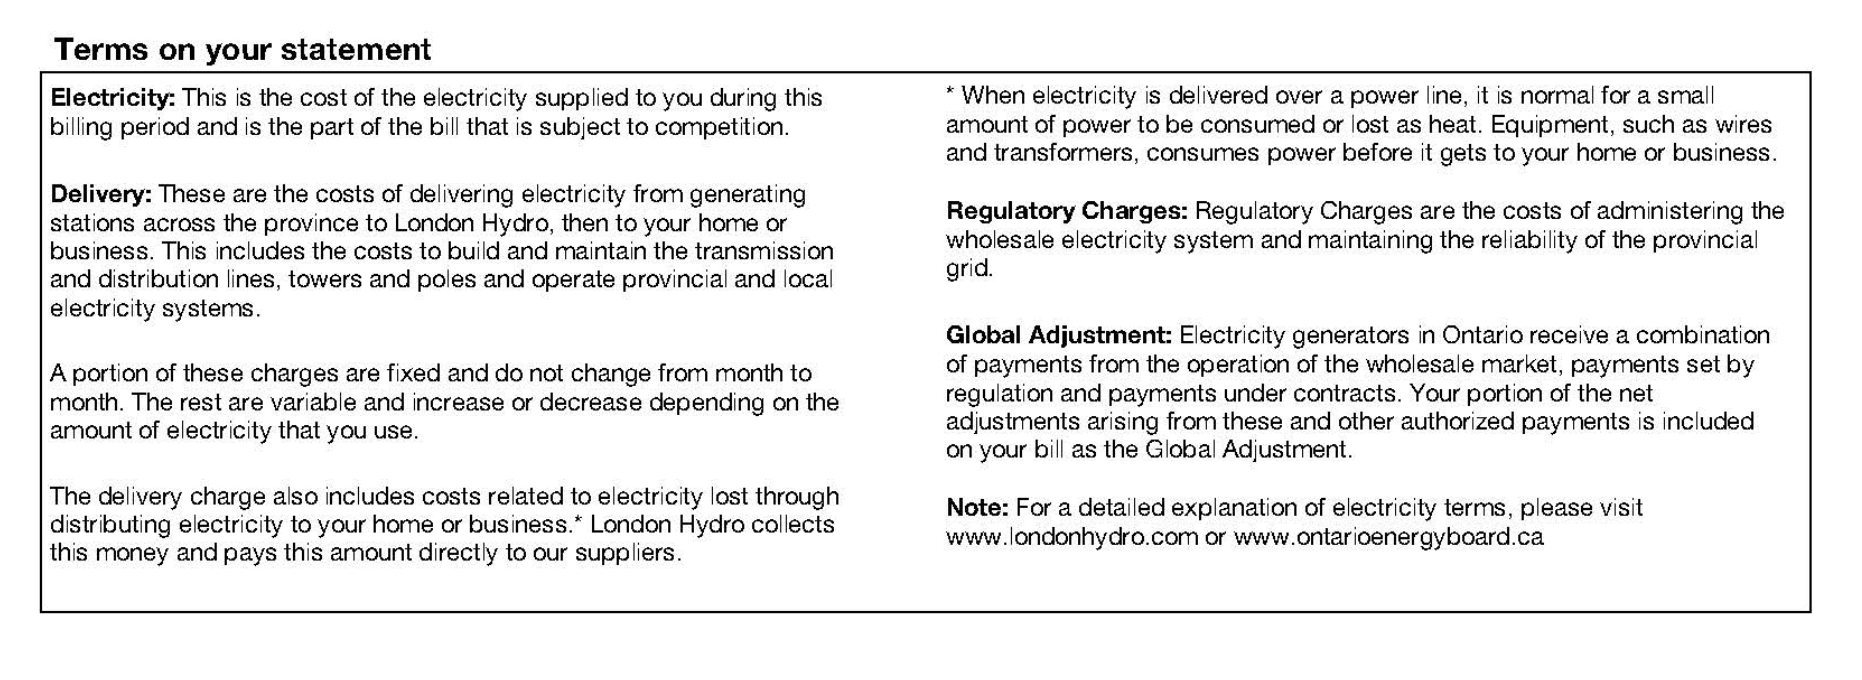 Image of the terms that can be found on a London Hydro bill. 